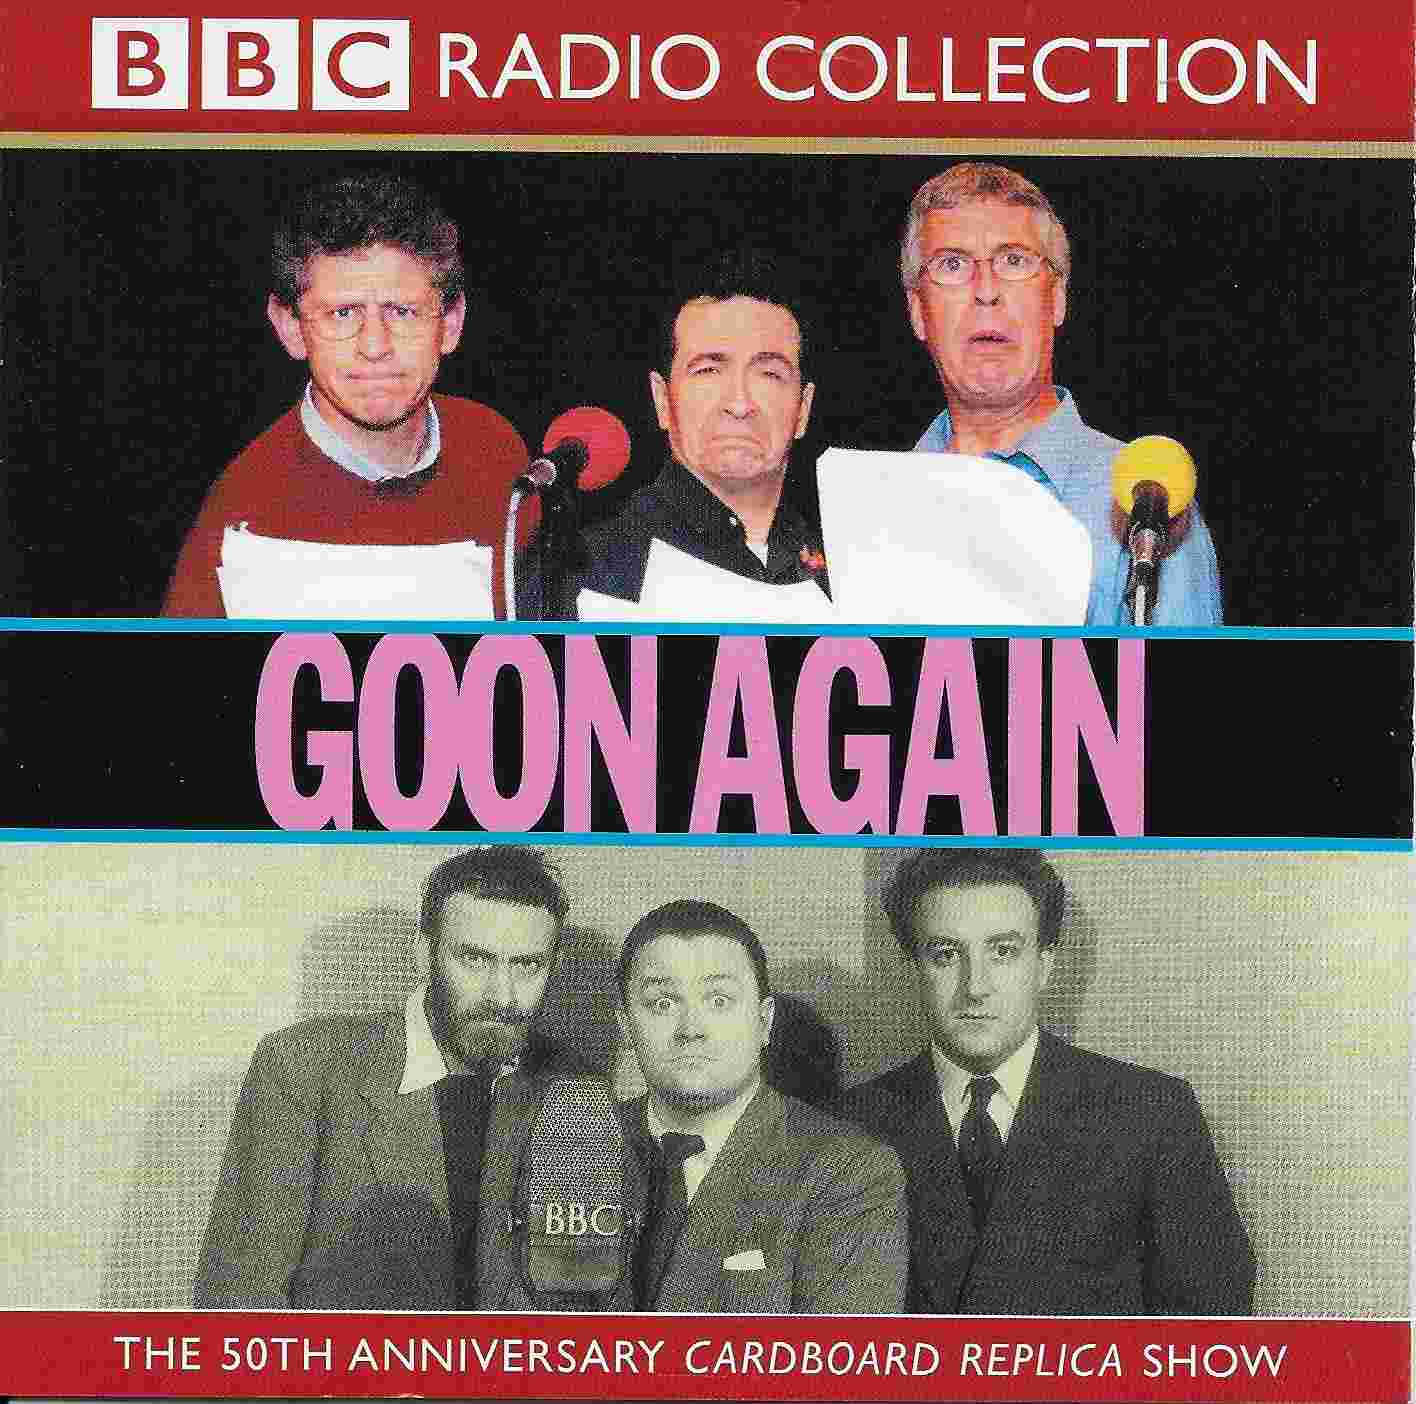 Picture of ISBN 0-563-53596-2 Goon again by artist Spike Milligan / Larry Stephens from the BBC cds - Records and Tapes library